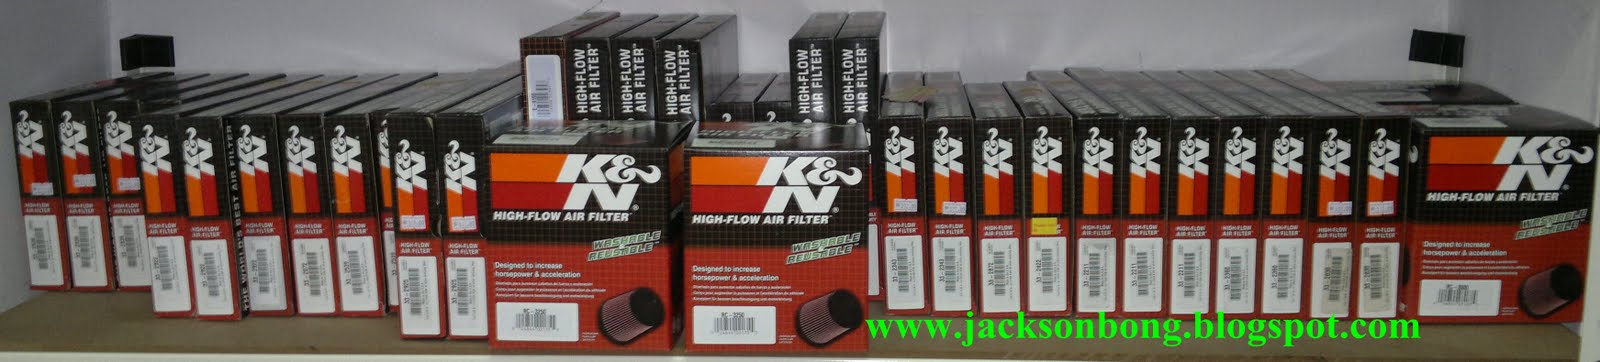 Pro-ride Motorsports: New Arrival for K & N filters!